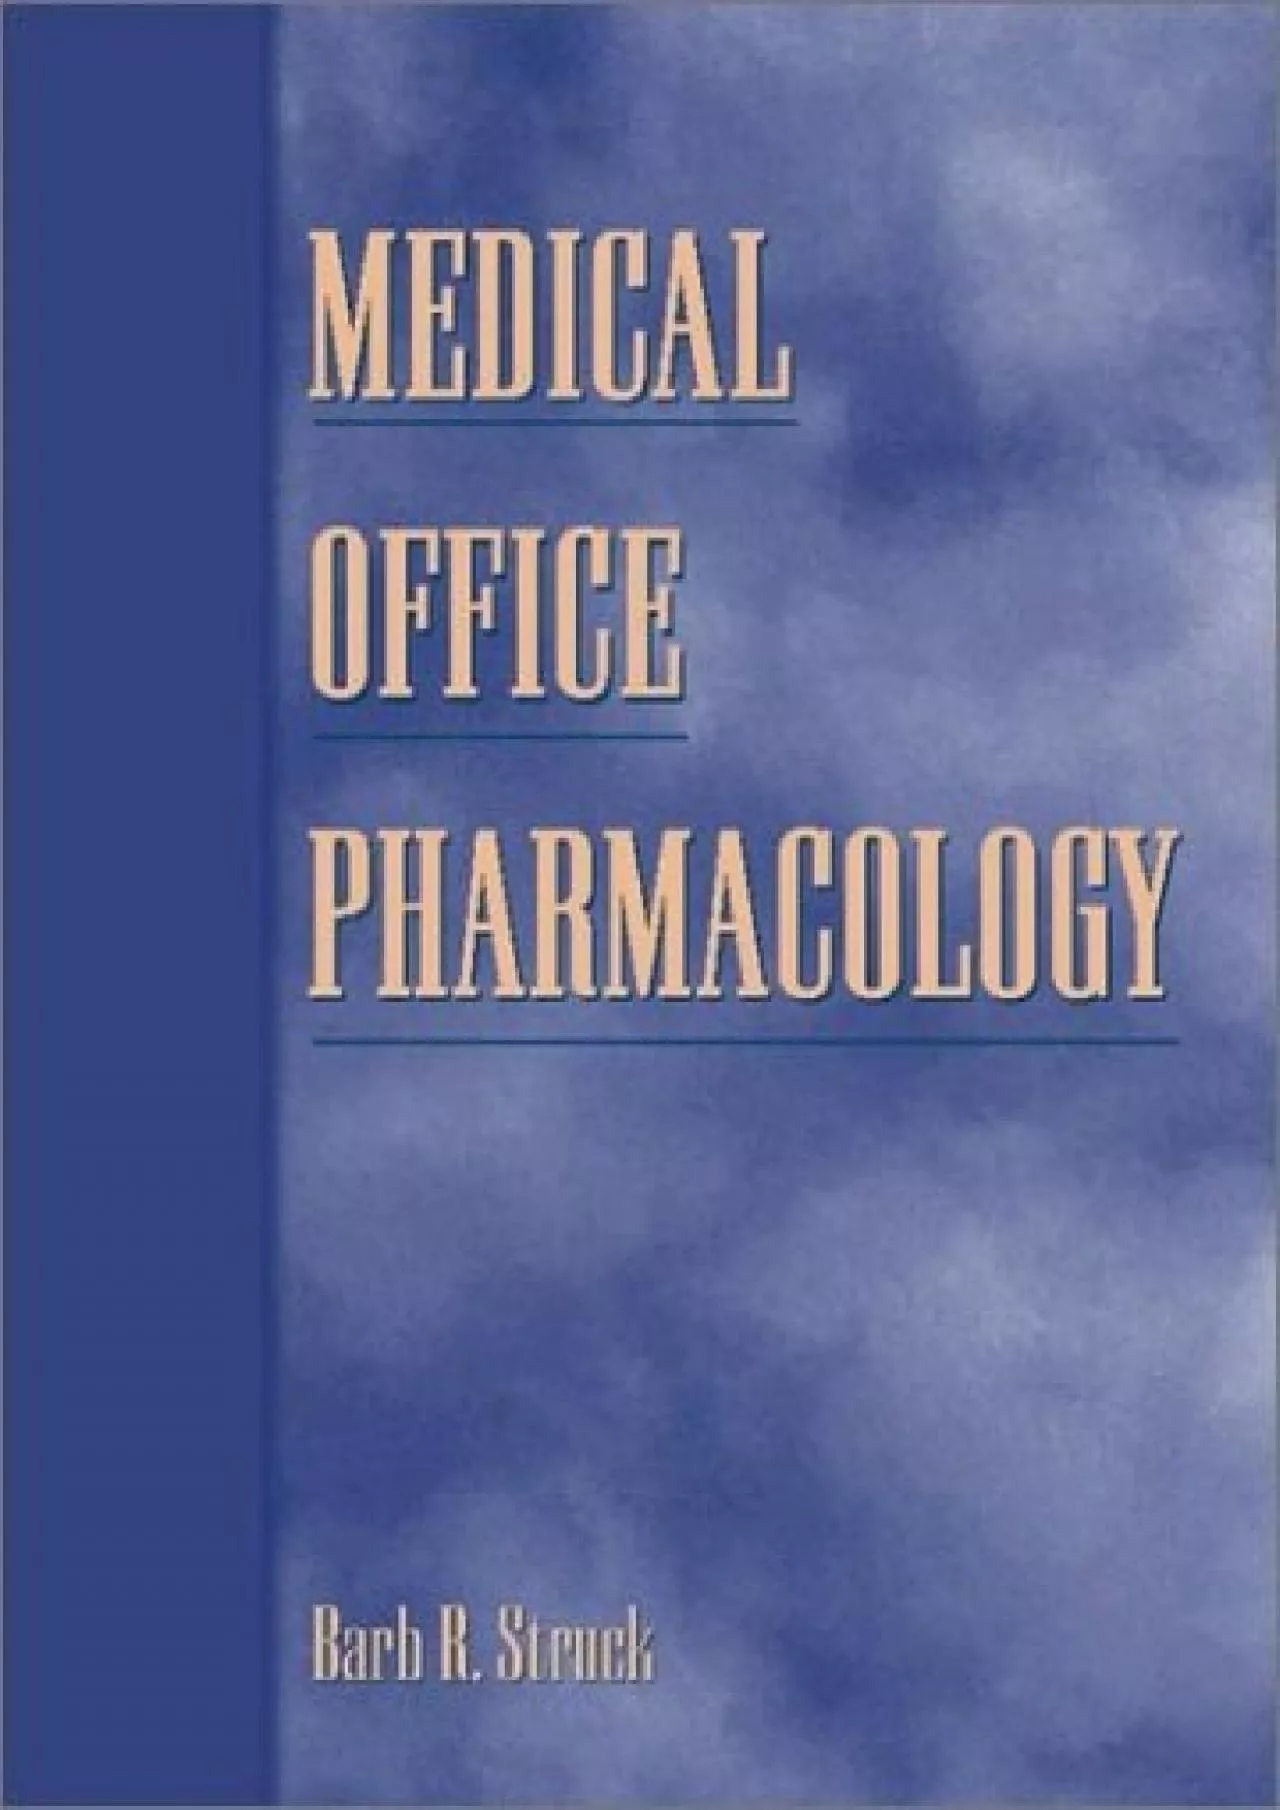 (DOWNLOAD)-Medical Office Pharmacology